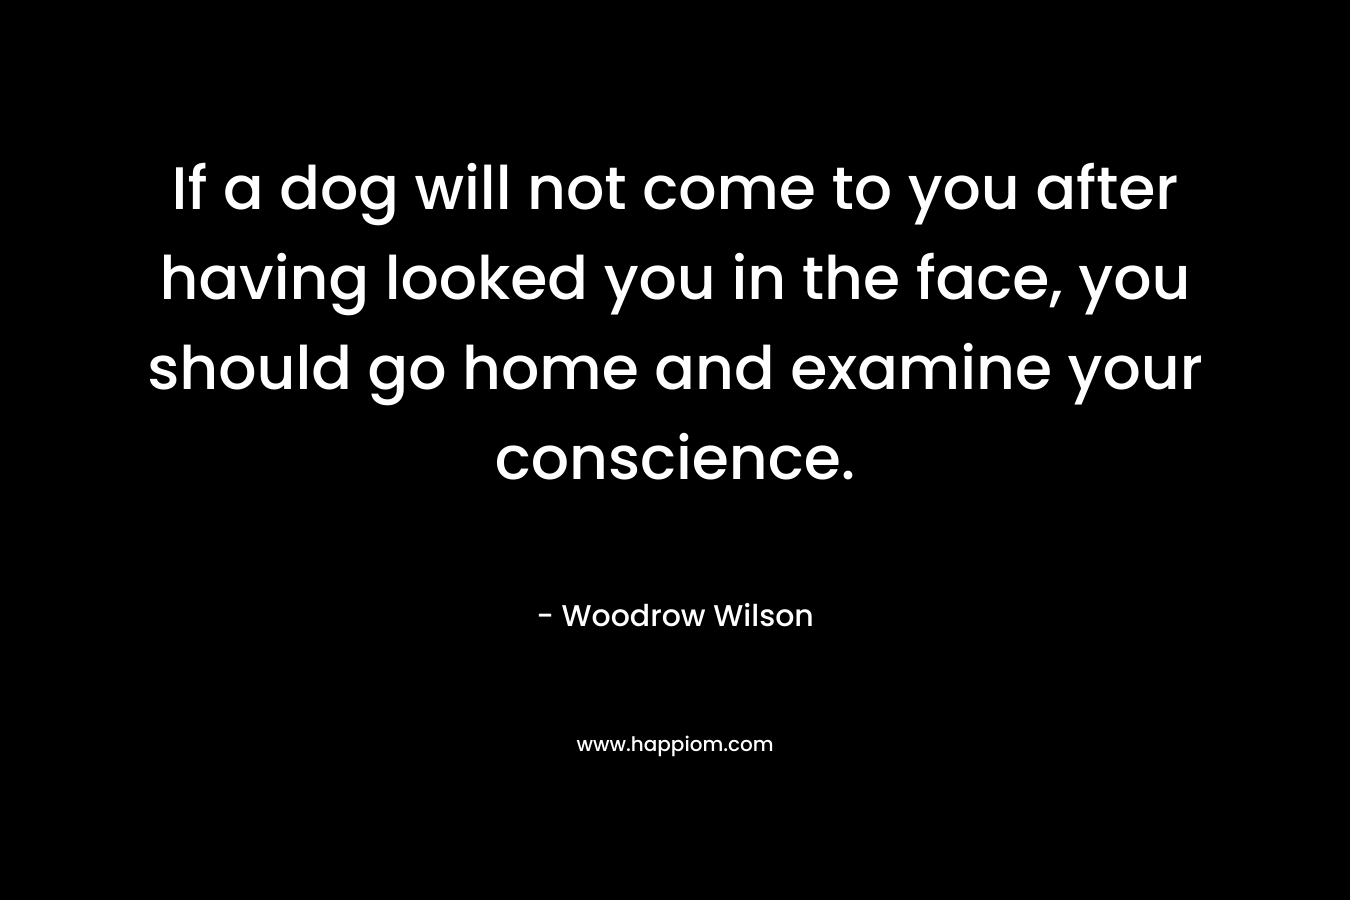 If a dog will not come to you after having looked you in the face, you should go home and examine your conscience. – Woodrow Wilson